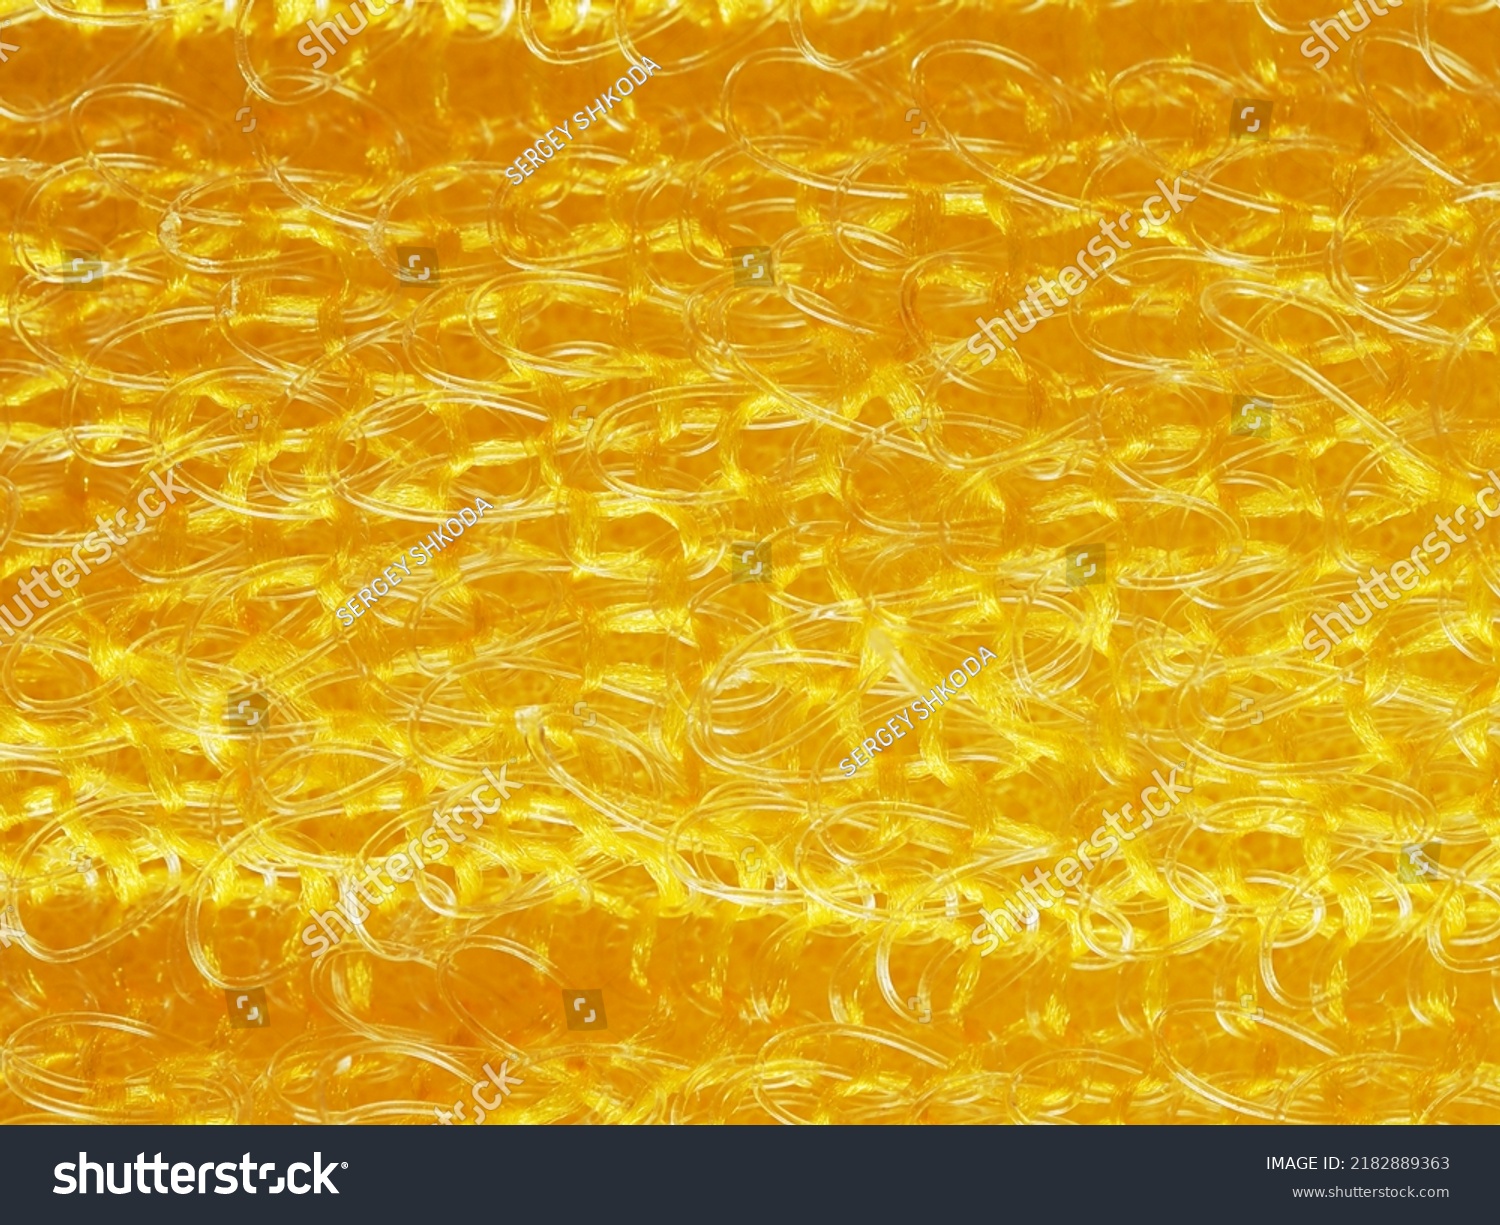 close up, background, texture, large horizontal banner. heterogeneous surface structure bright saturated yellow sponge for washing dishes, kitchen, bath. full depth of field. high resolution photo #2182889363